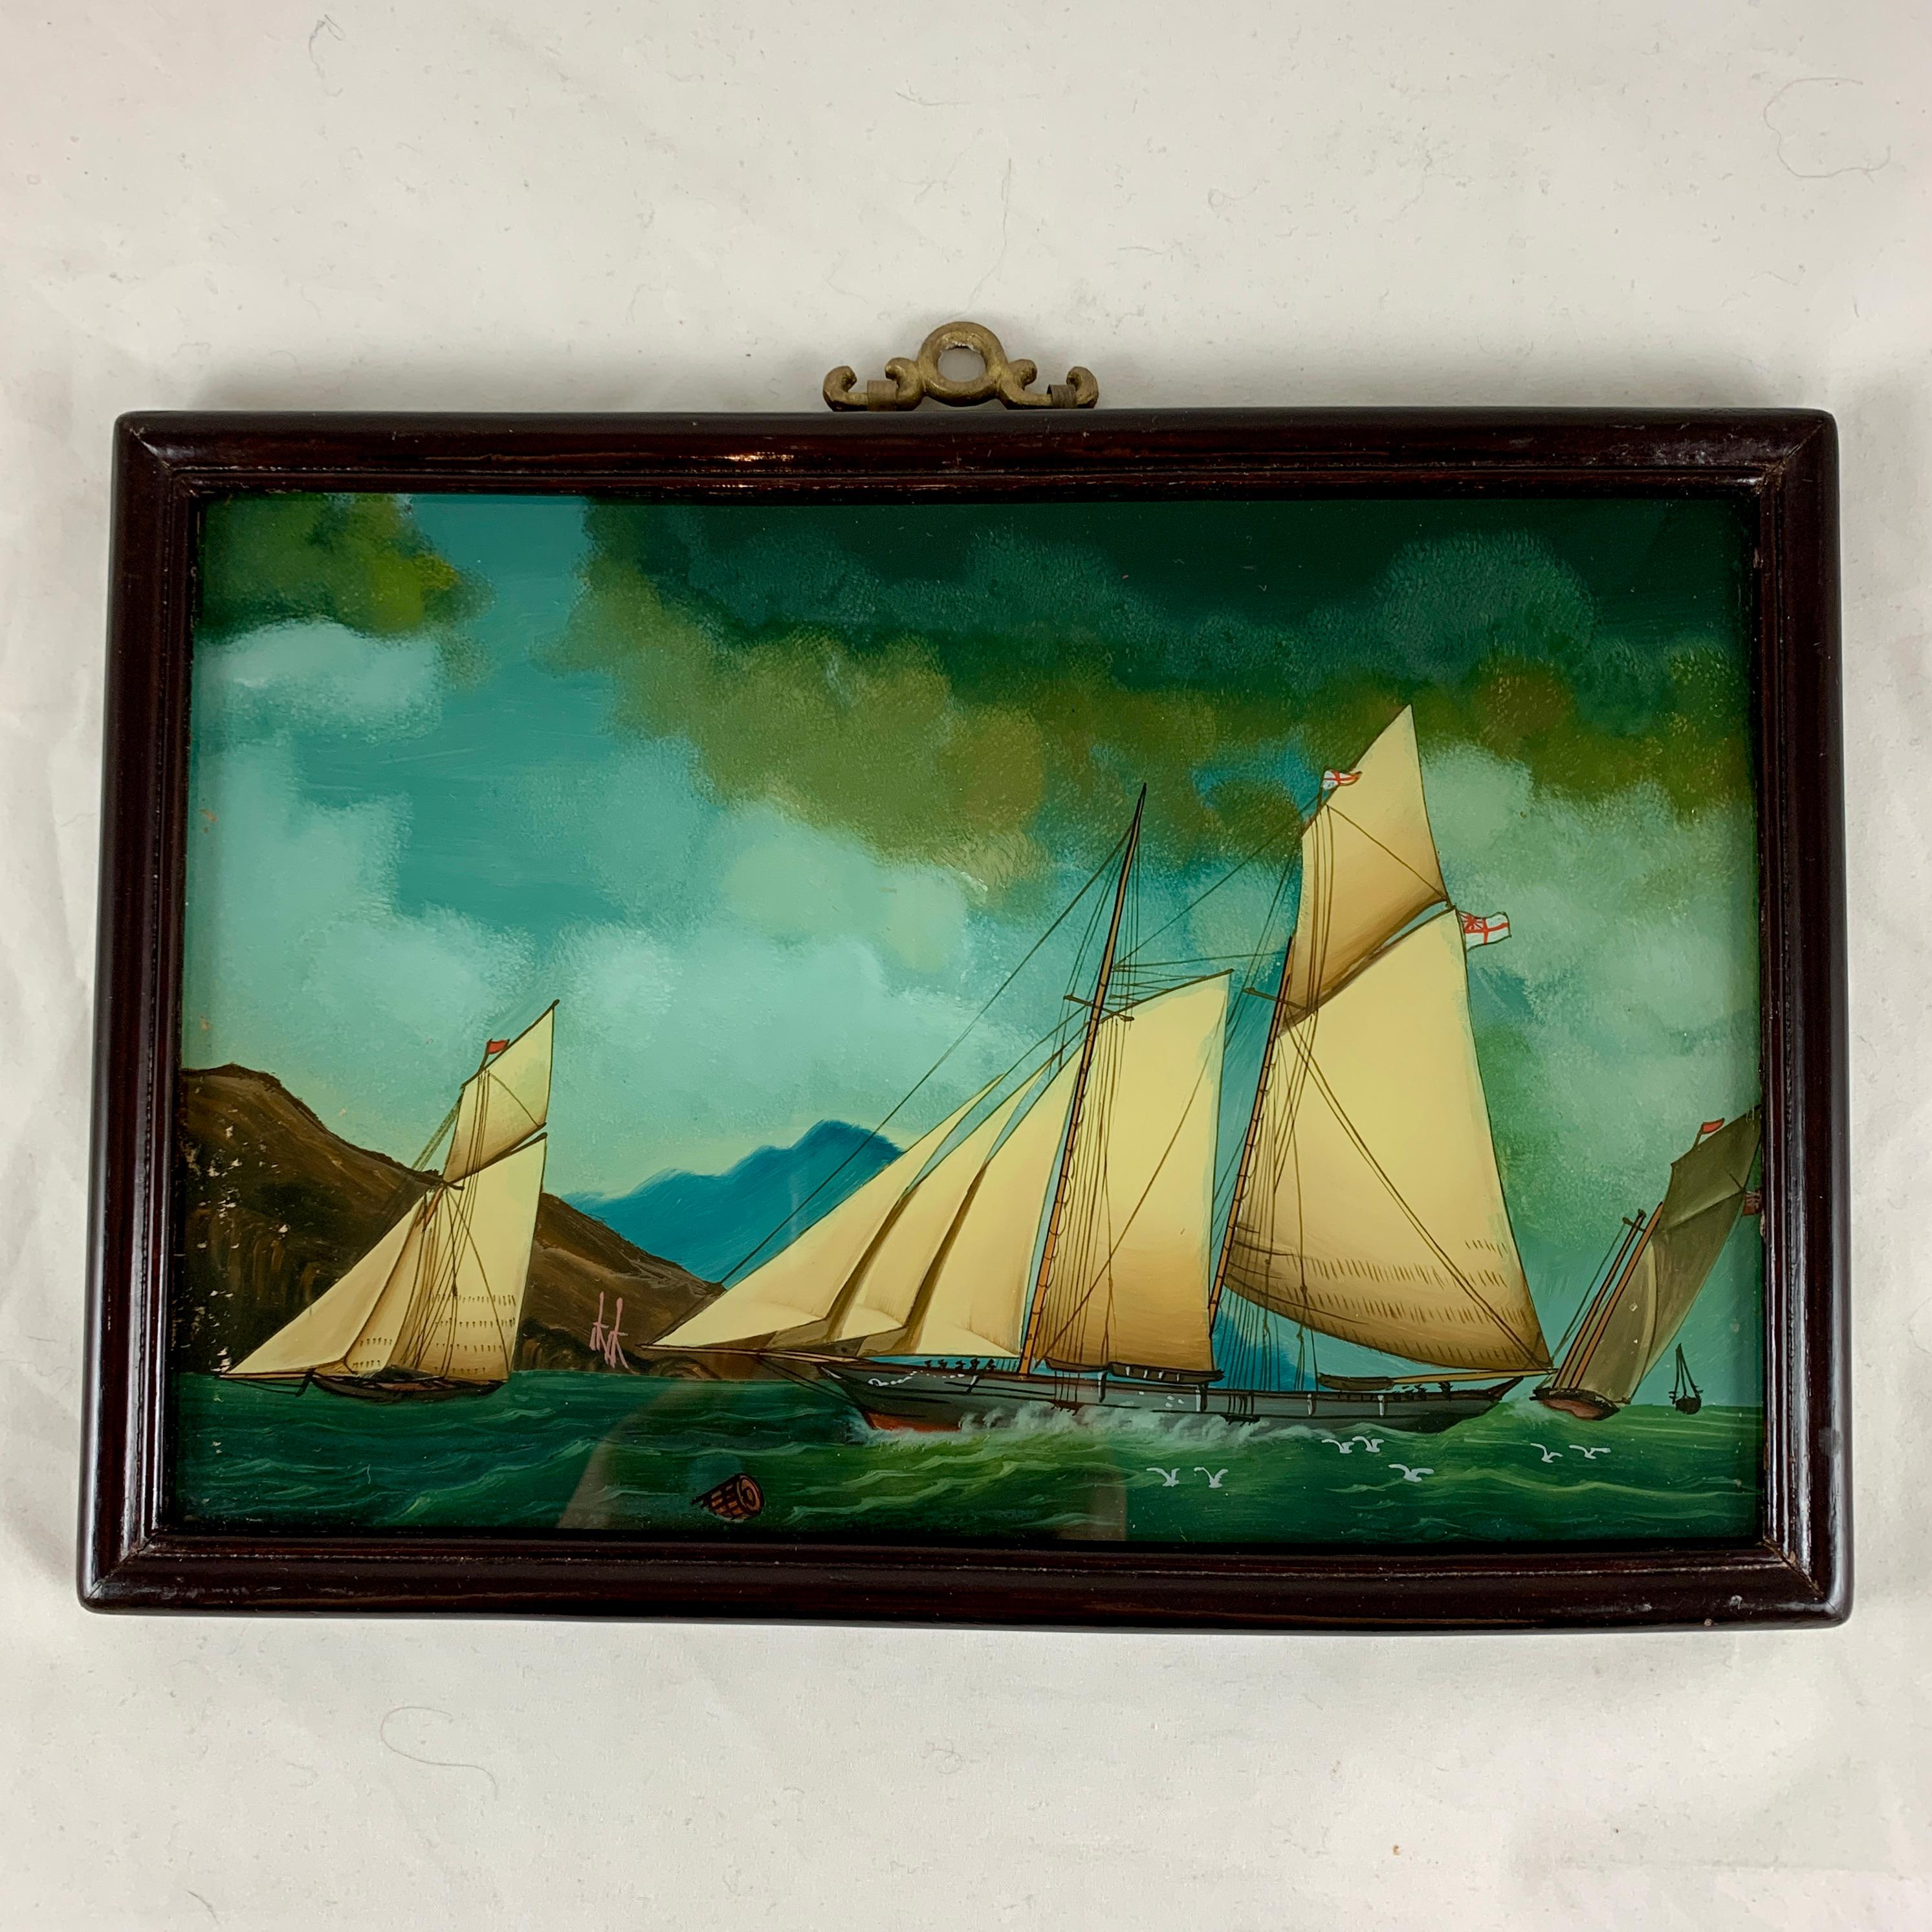 From France, a reverse glass painting of sailboats on the sea – “Voiliers Sur la Mer.” circa late 19th – early 20th century.

Reverse painting on glass is a traditional art form where the artist applies paint to a piece of glass, and the image is